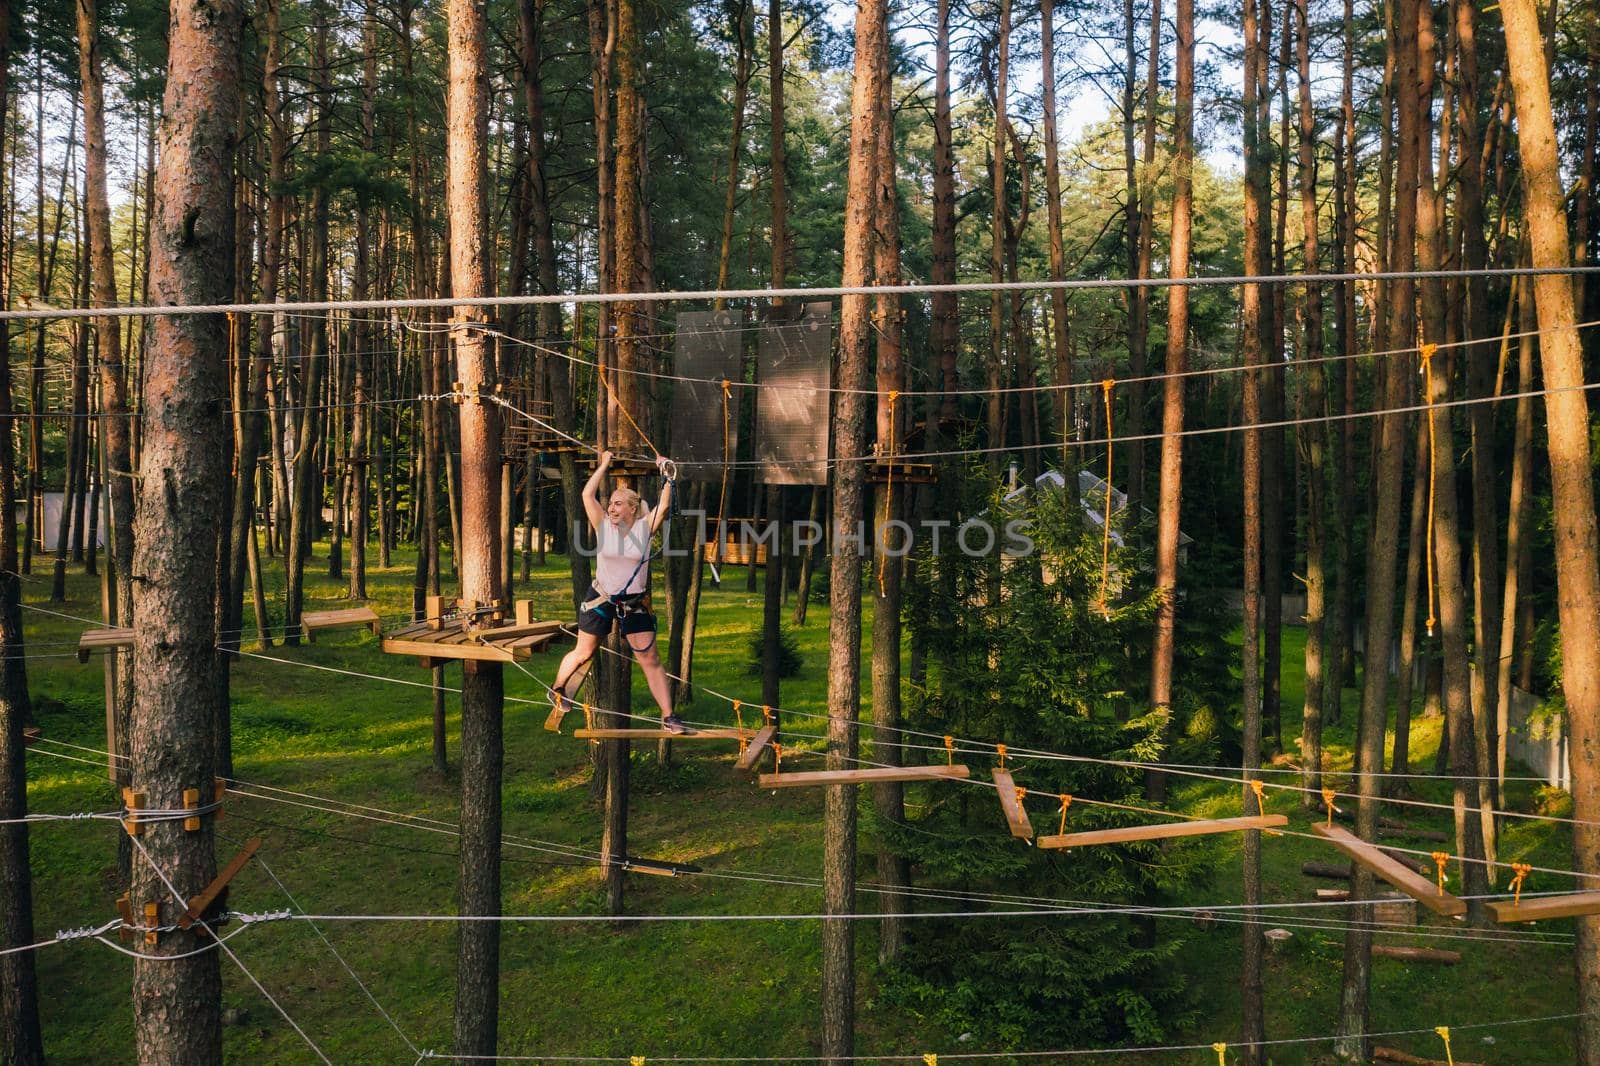 A woman overcomes an obstacle in a rope town. A woman in a forest rope park by Lobachad